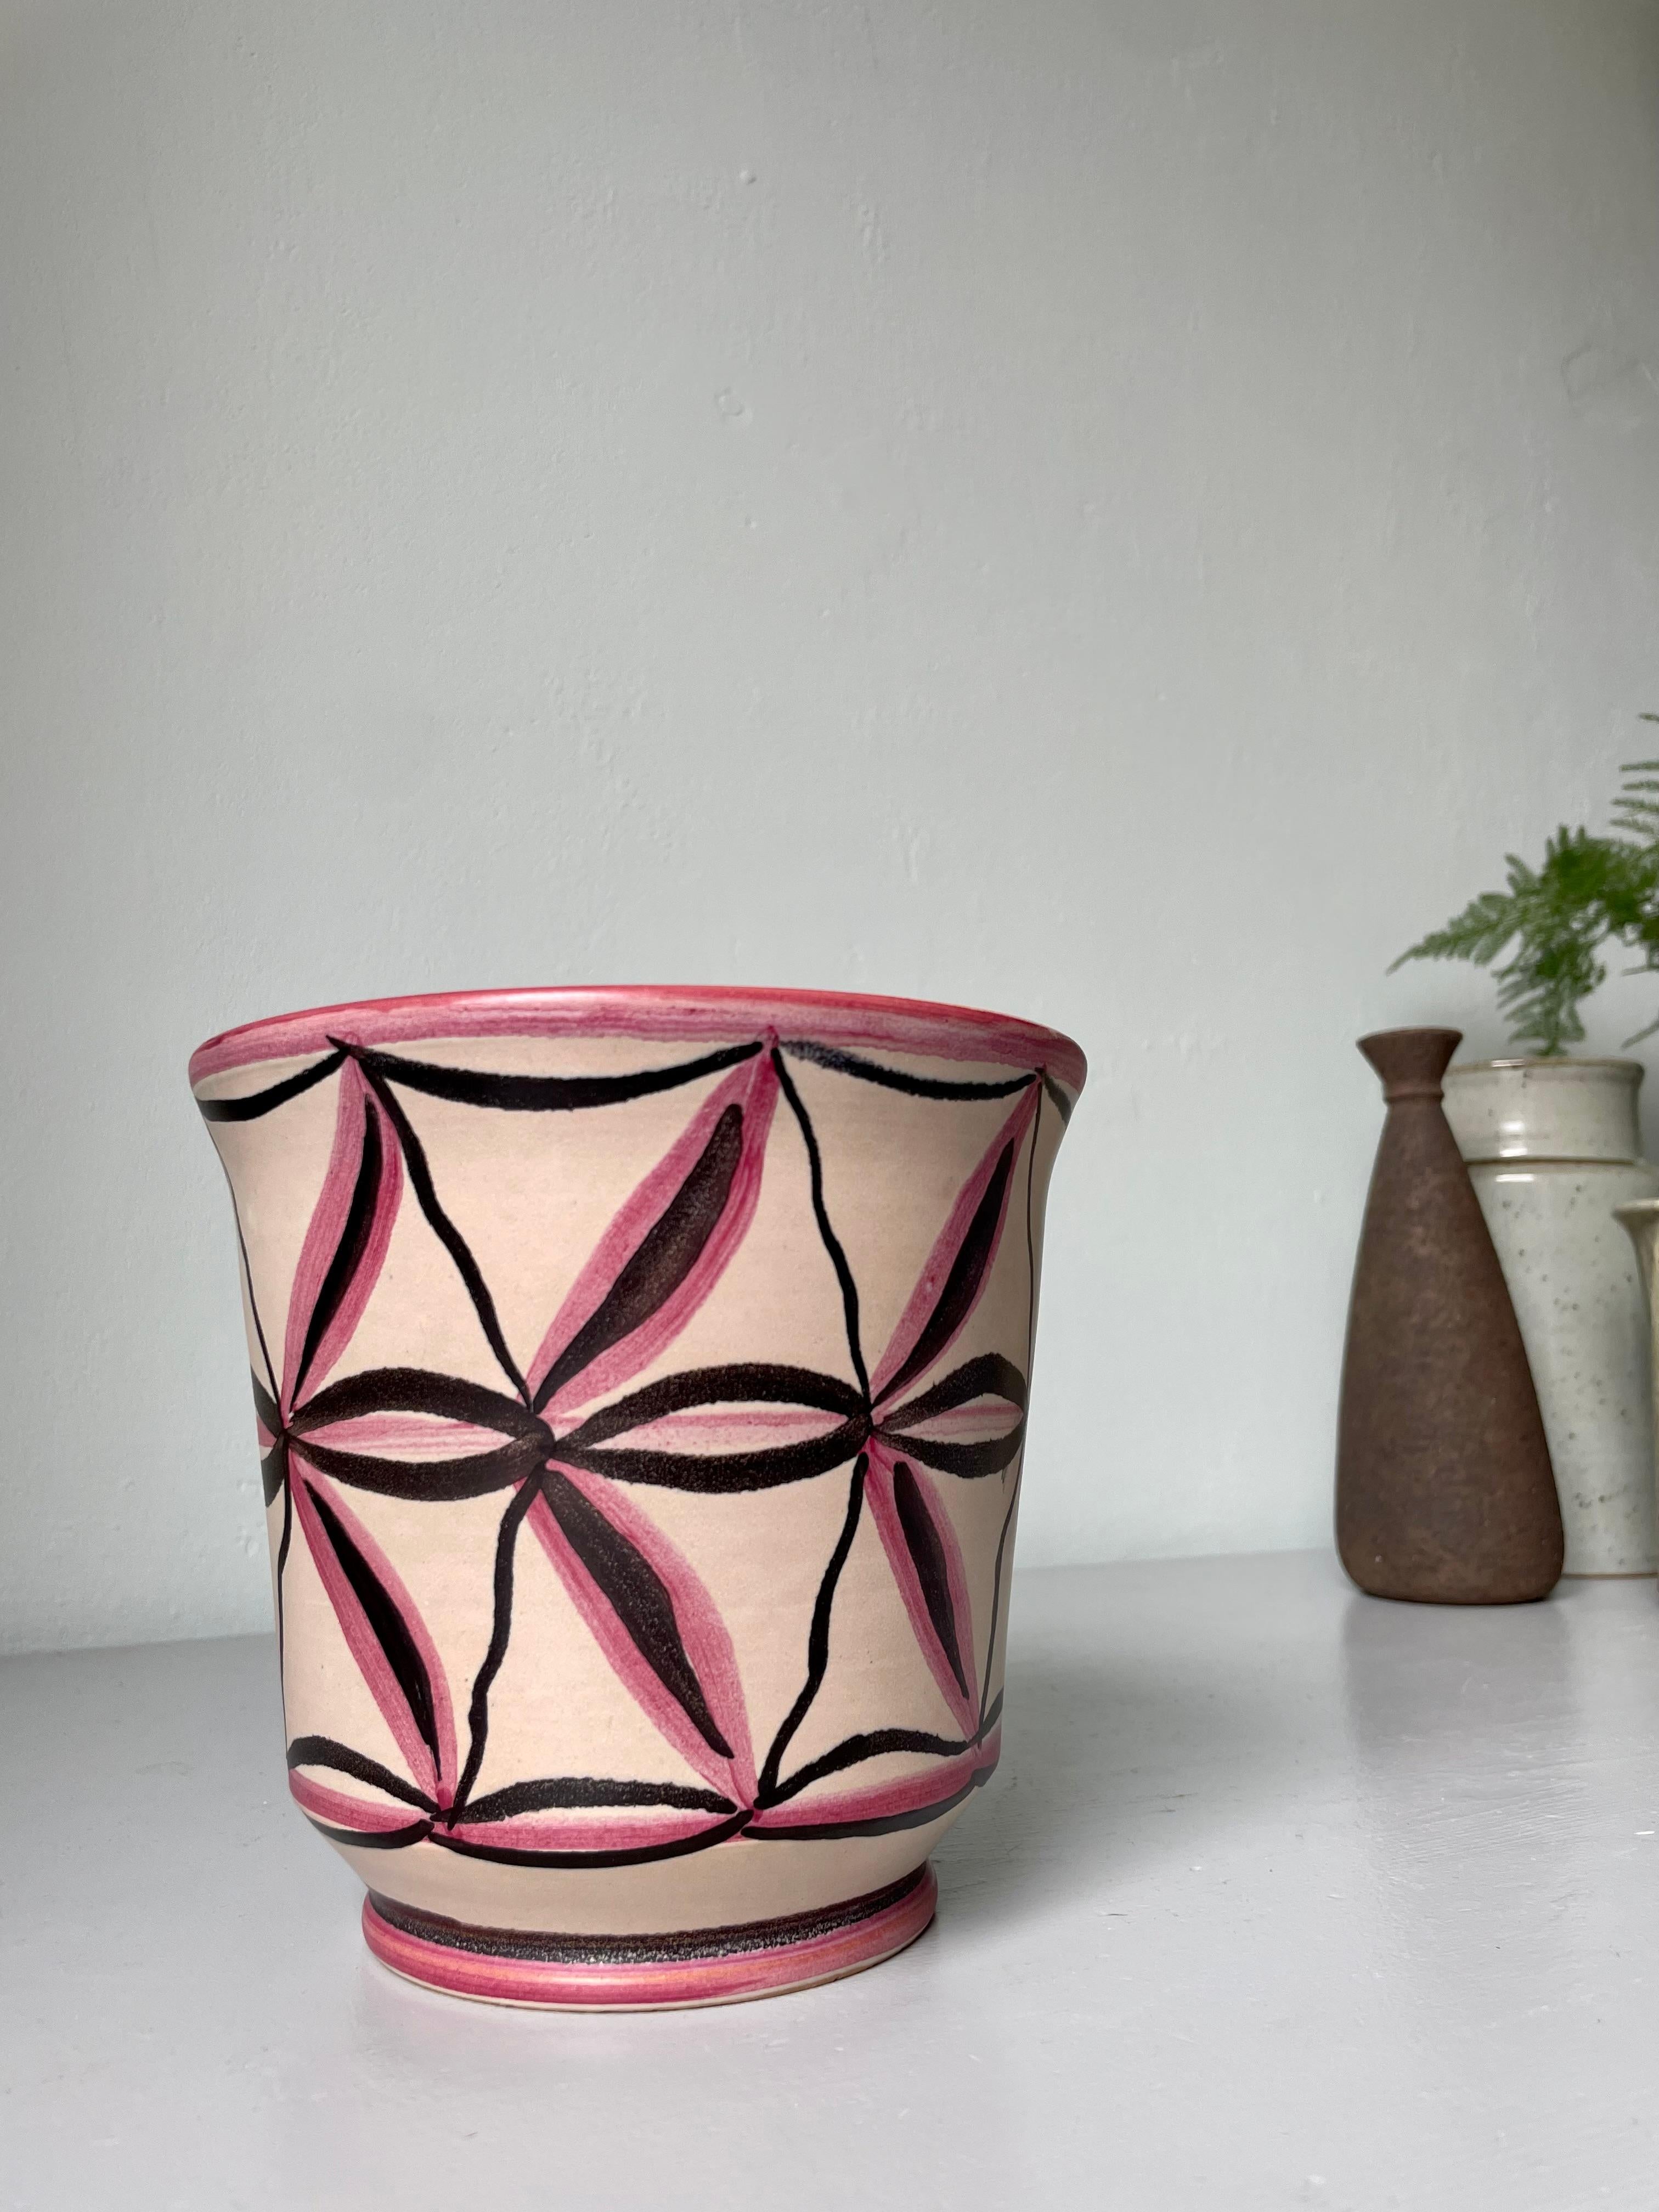 Danish midcentury modern hand-thrown studio planter with hand-painted graphic organic decor in rose pink and black soft lines over the warm beige base. Manufactured by E.B.S. Klint in the 1950s. Signed under base. Beautiful vintage condition.